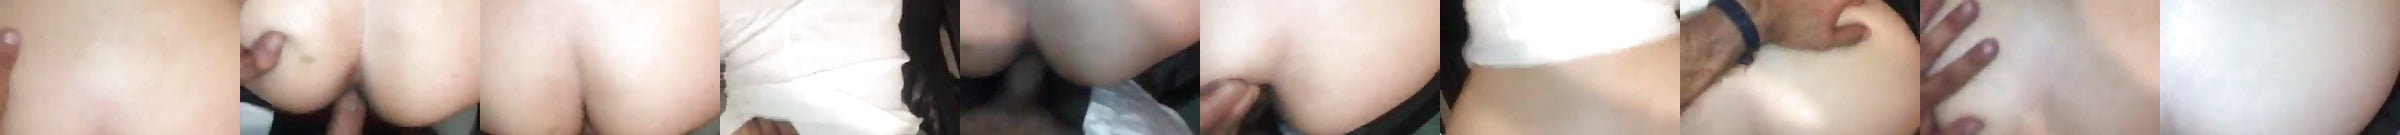 Featured Mexican Porn Videos 42 XHamster